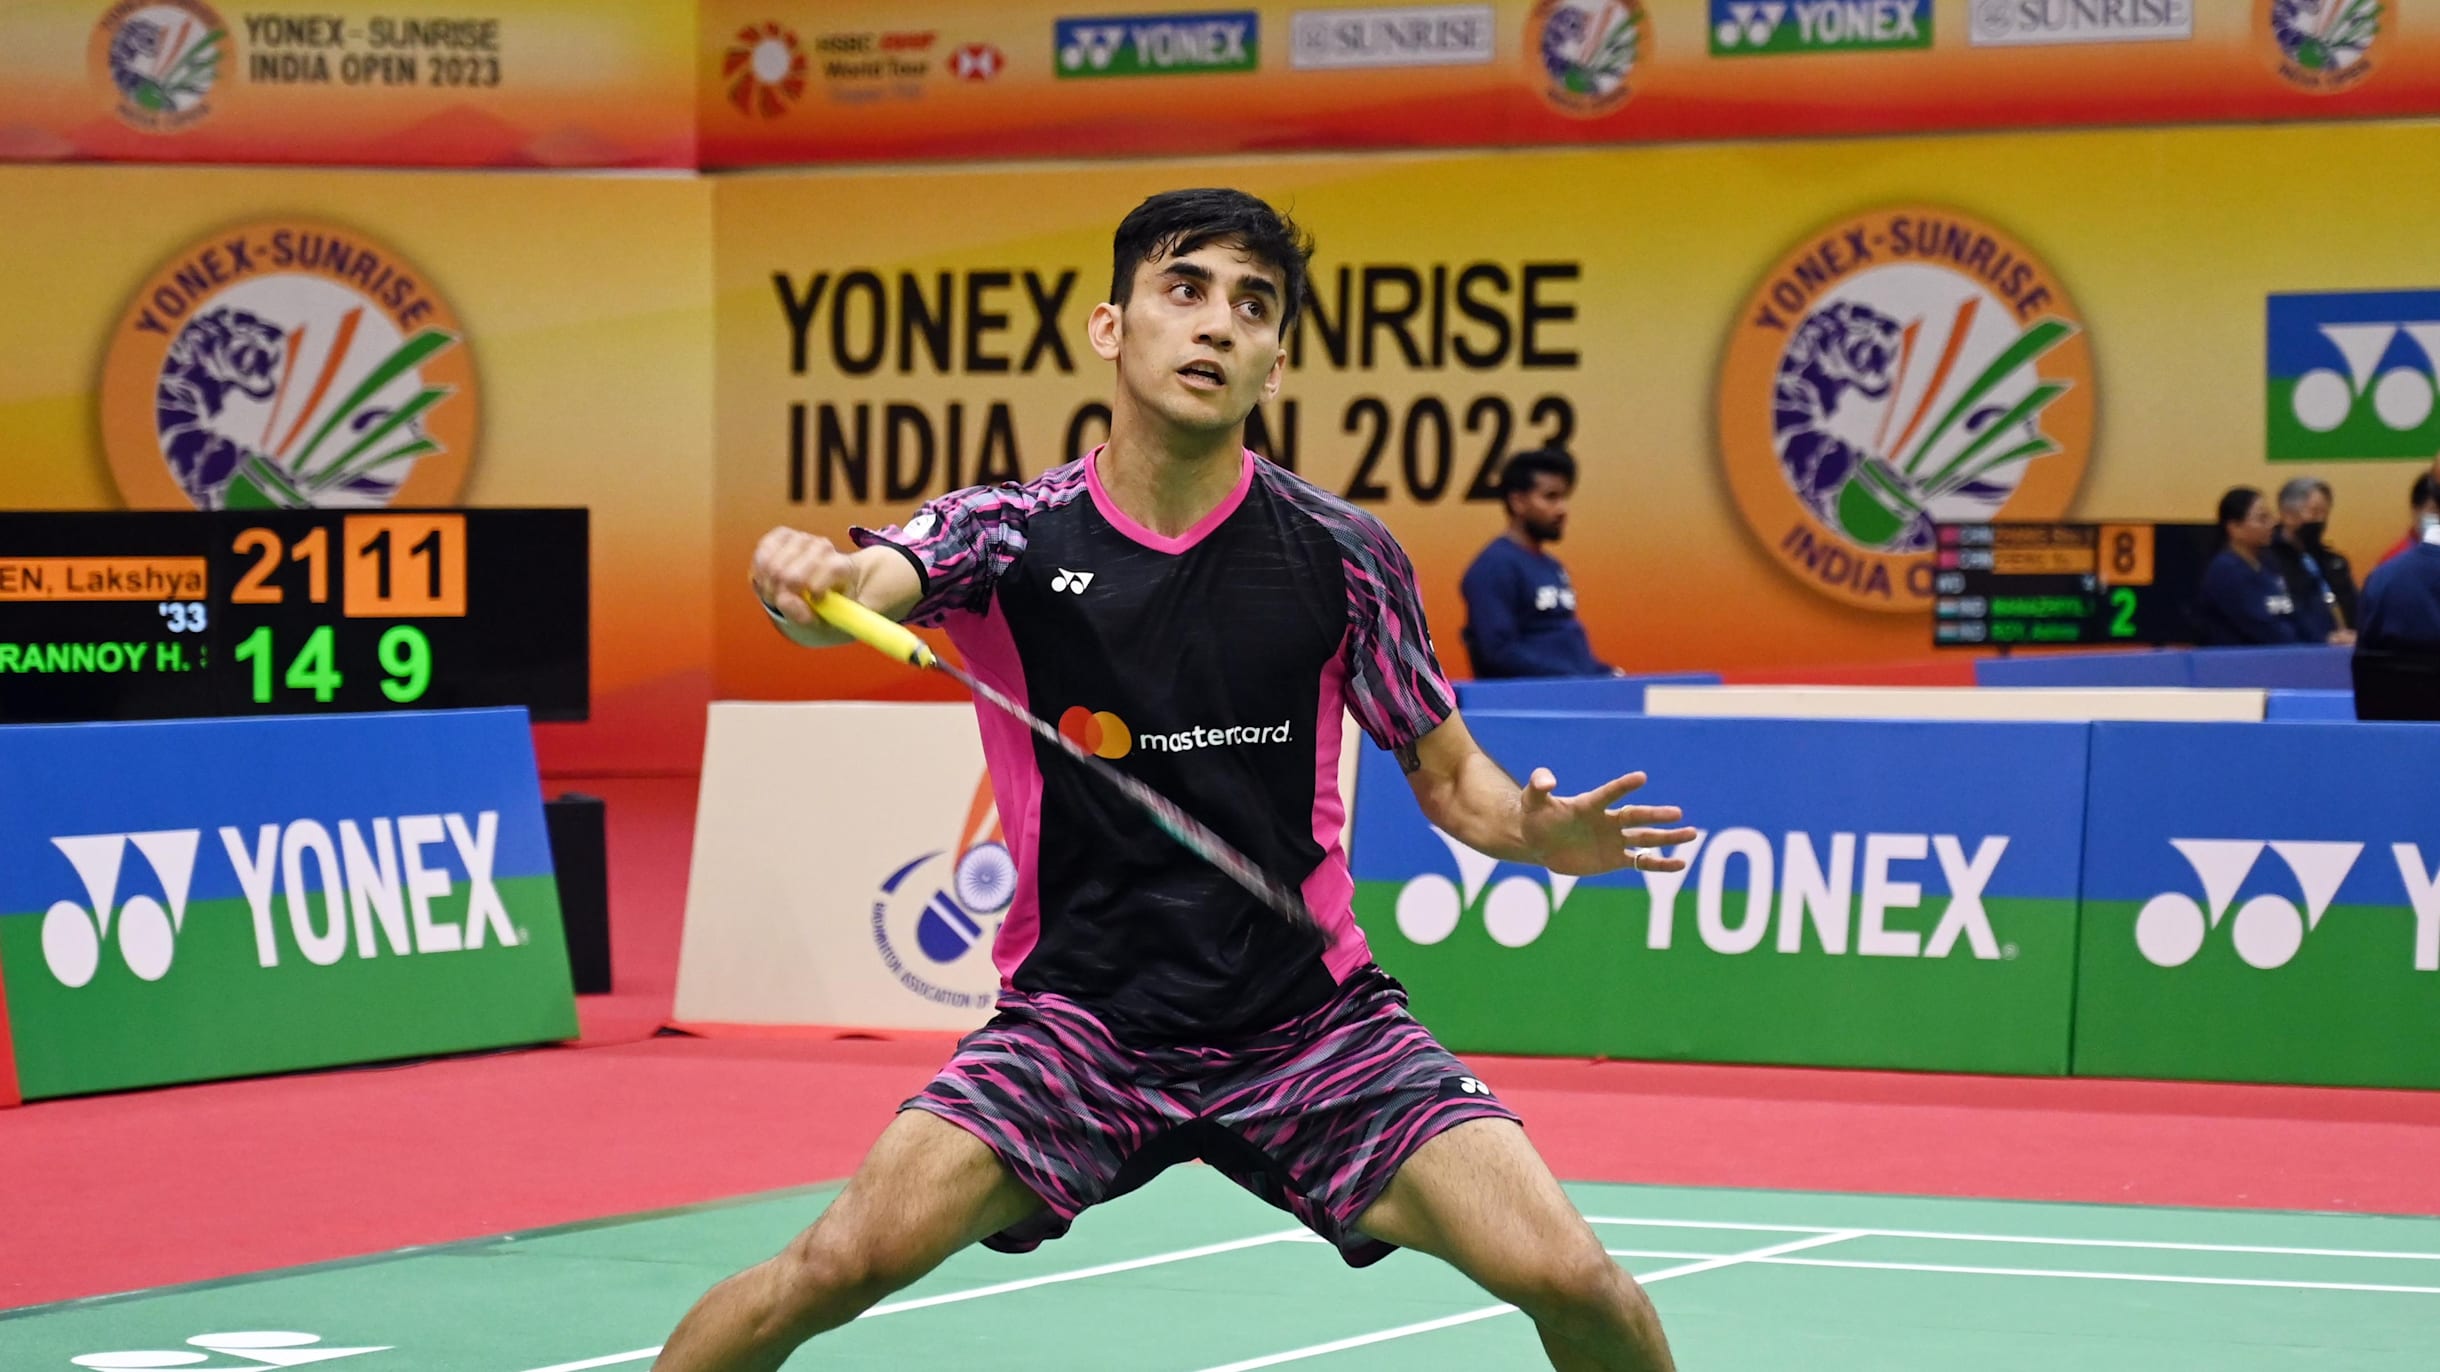 India Open 2023 badminton Results and scores for Indian players